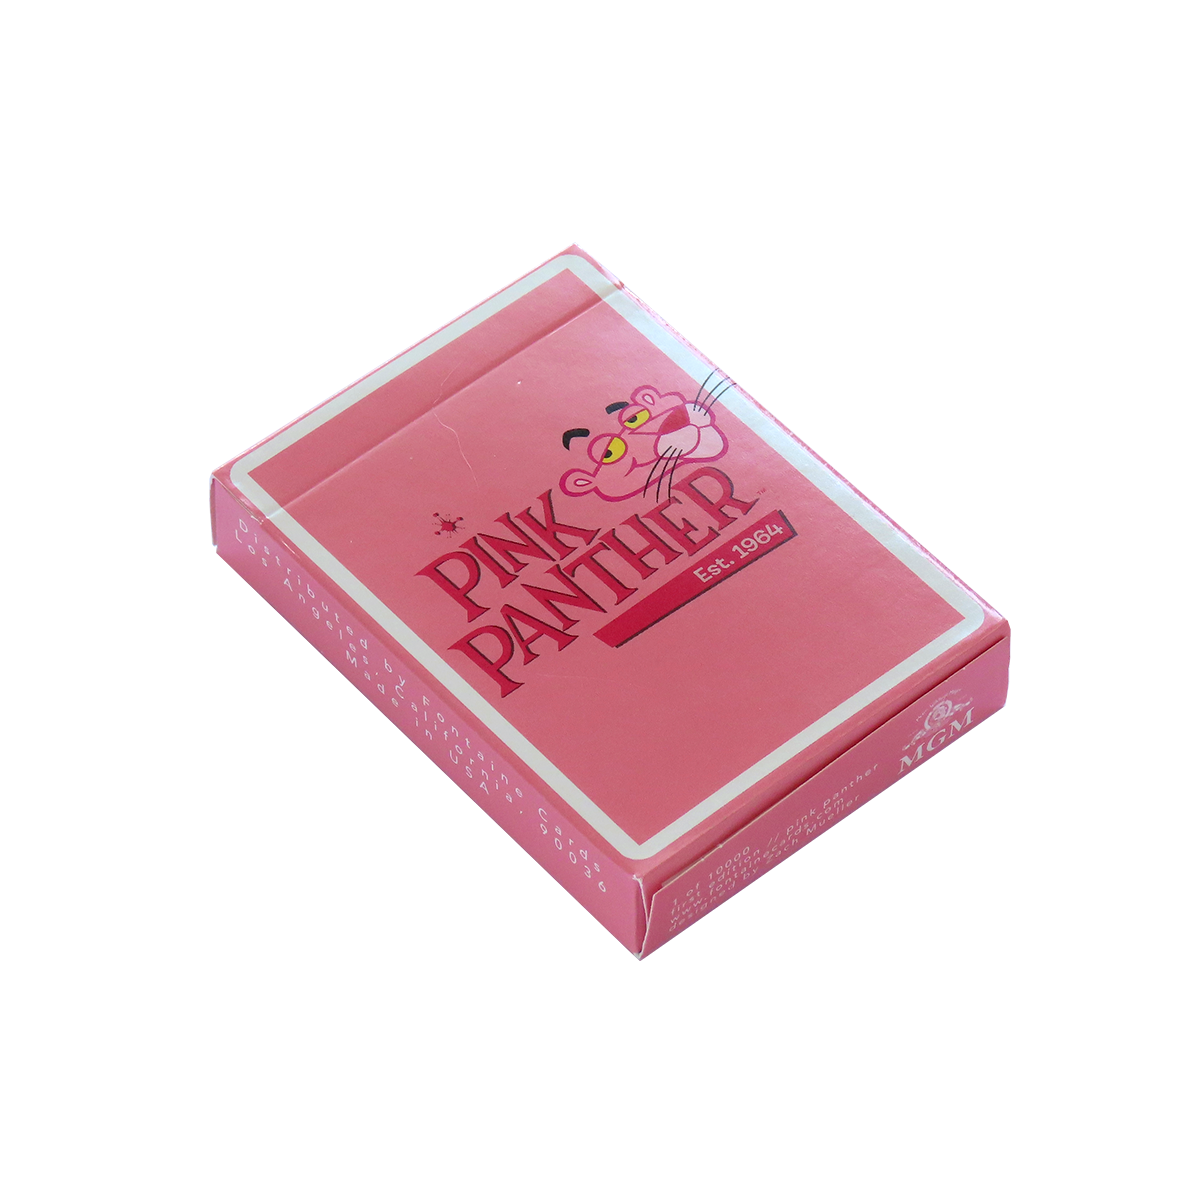 Fontaine x Pink Panther